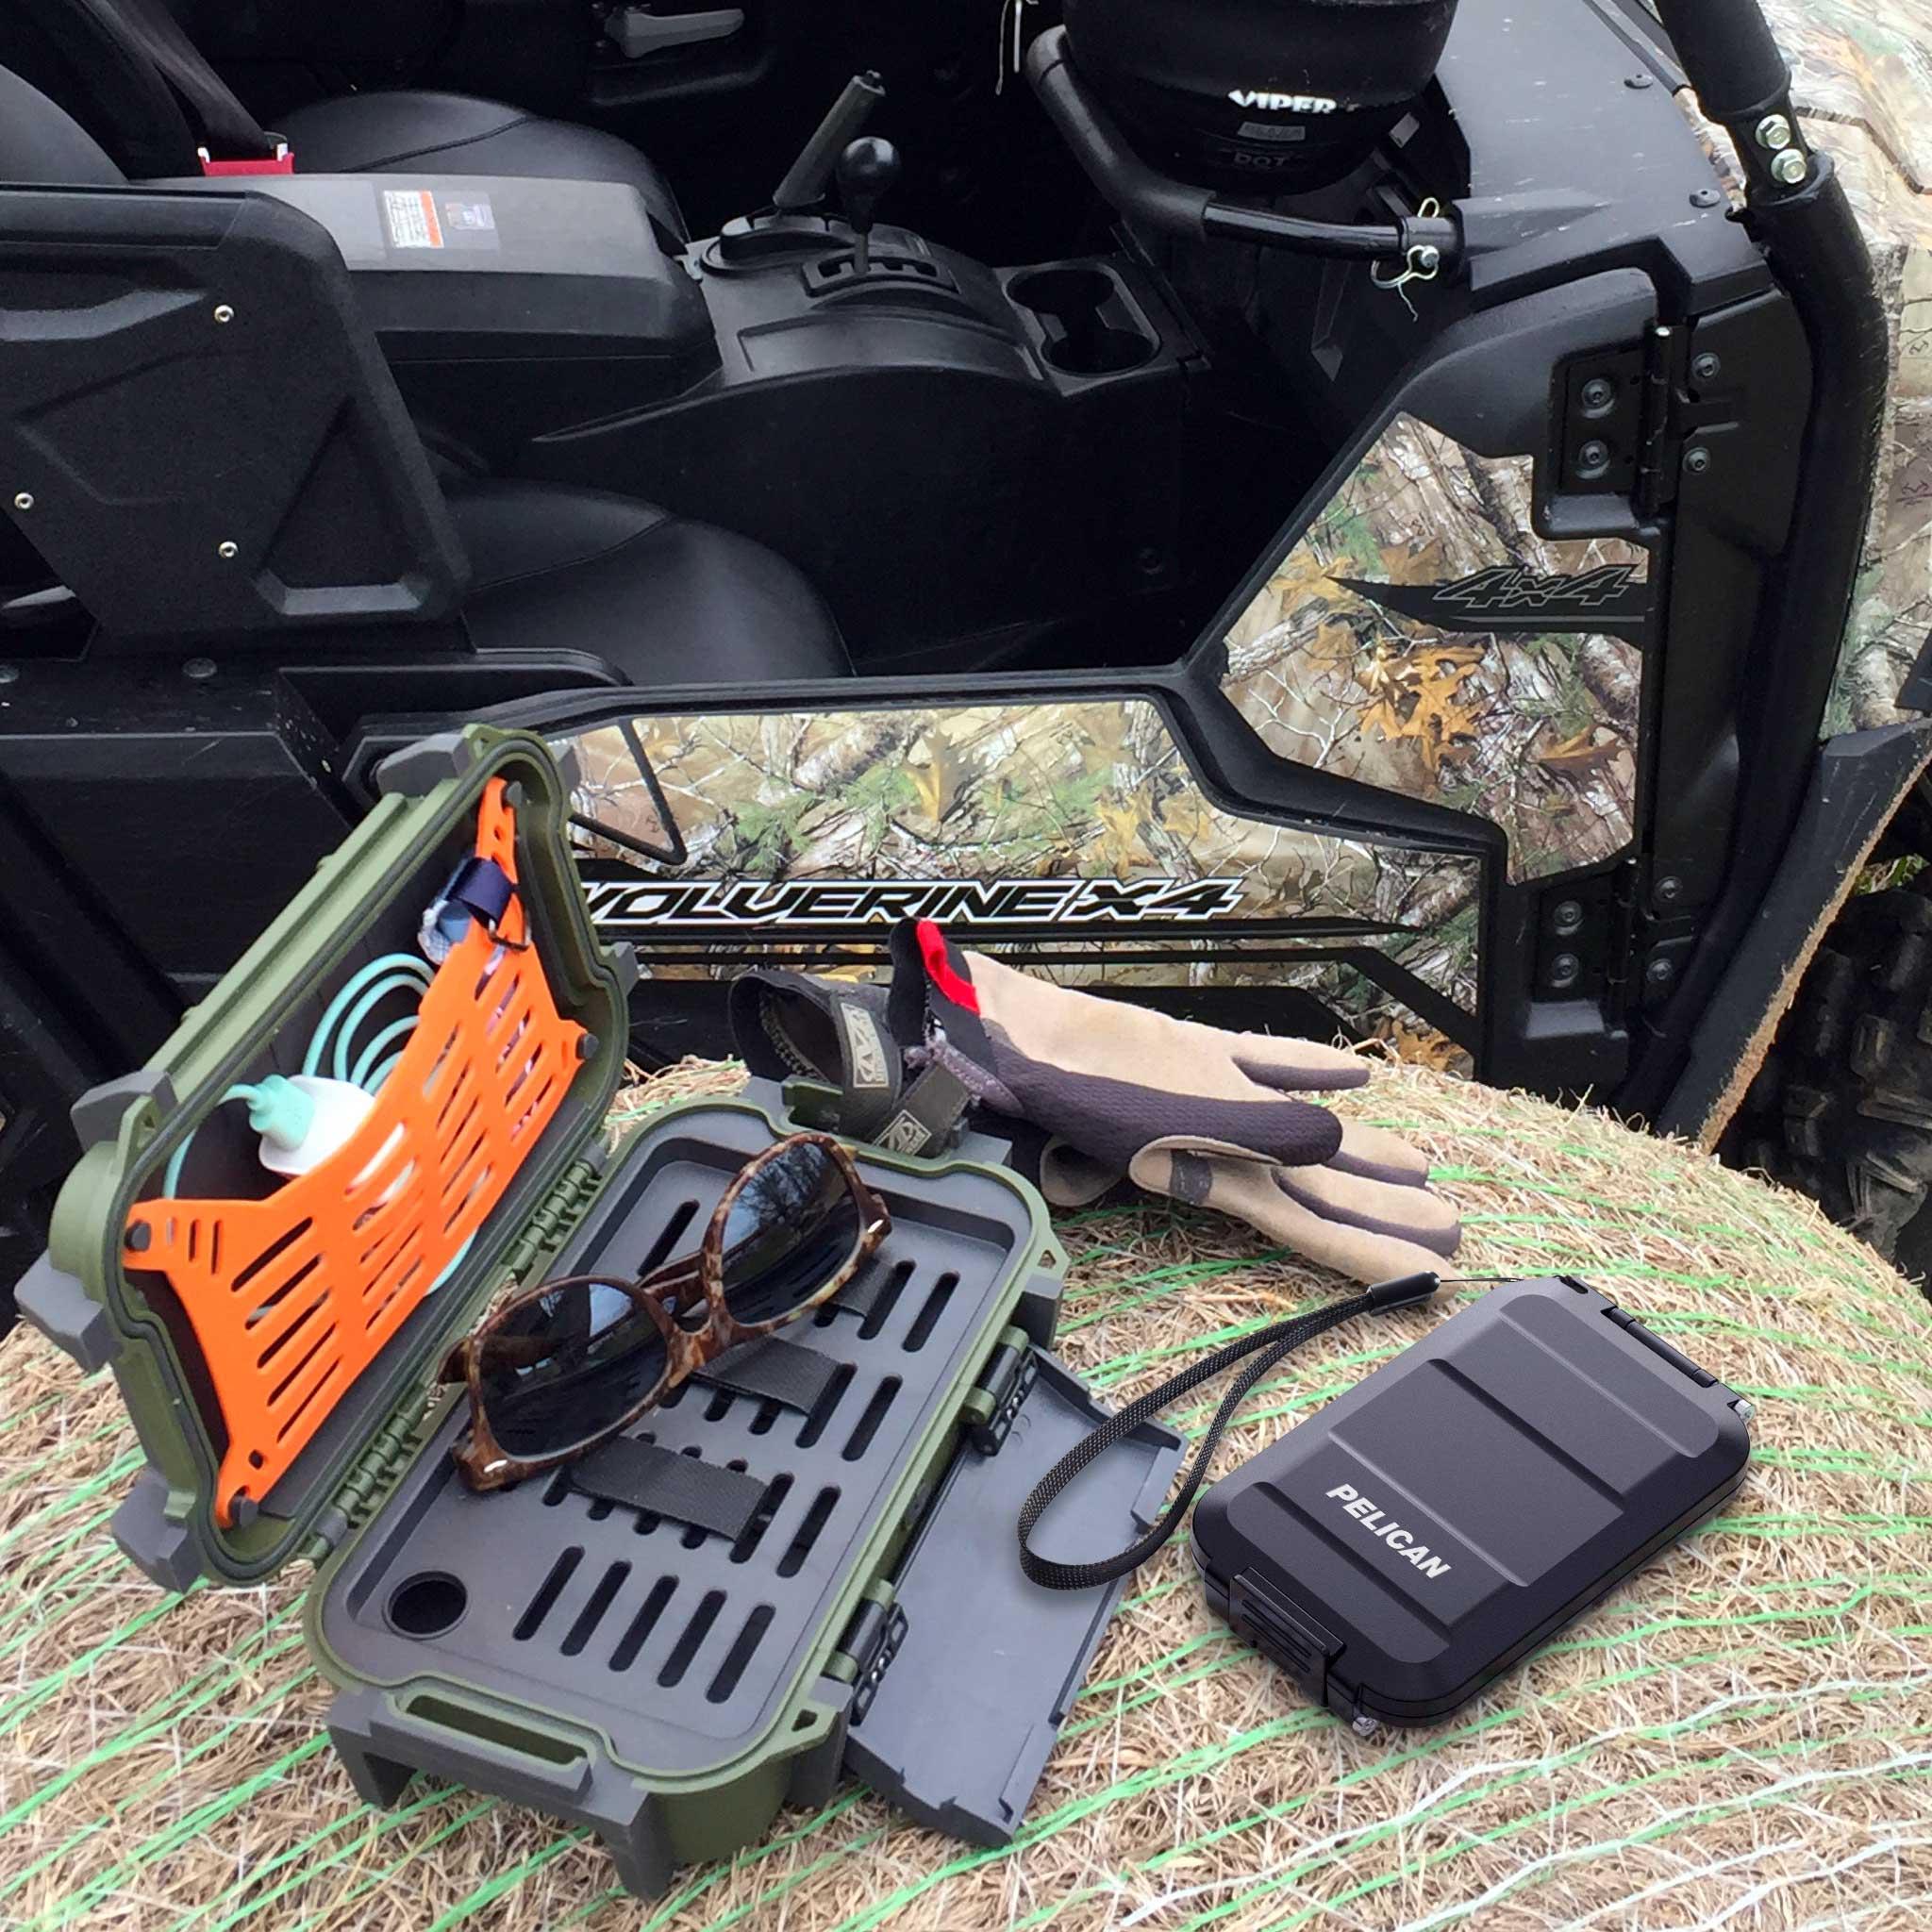 OD Green Pelican R40 Ruck Case next to ATV